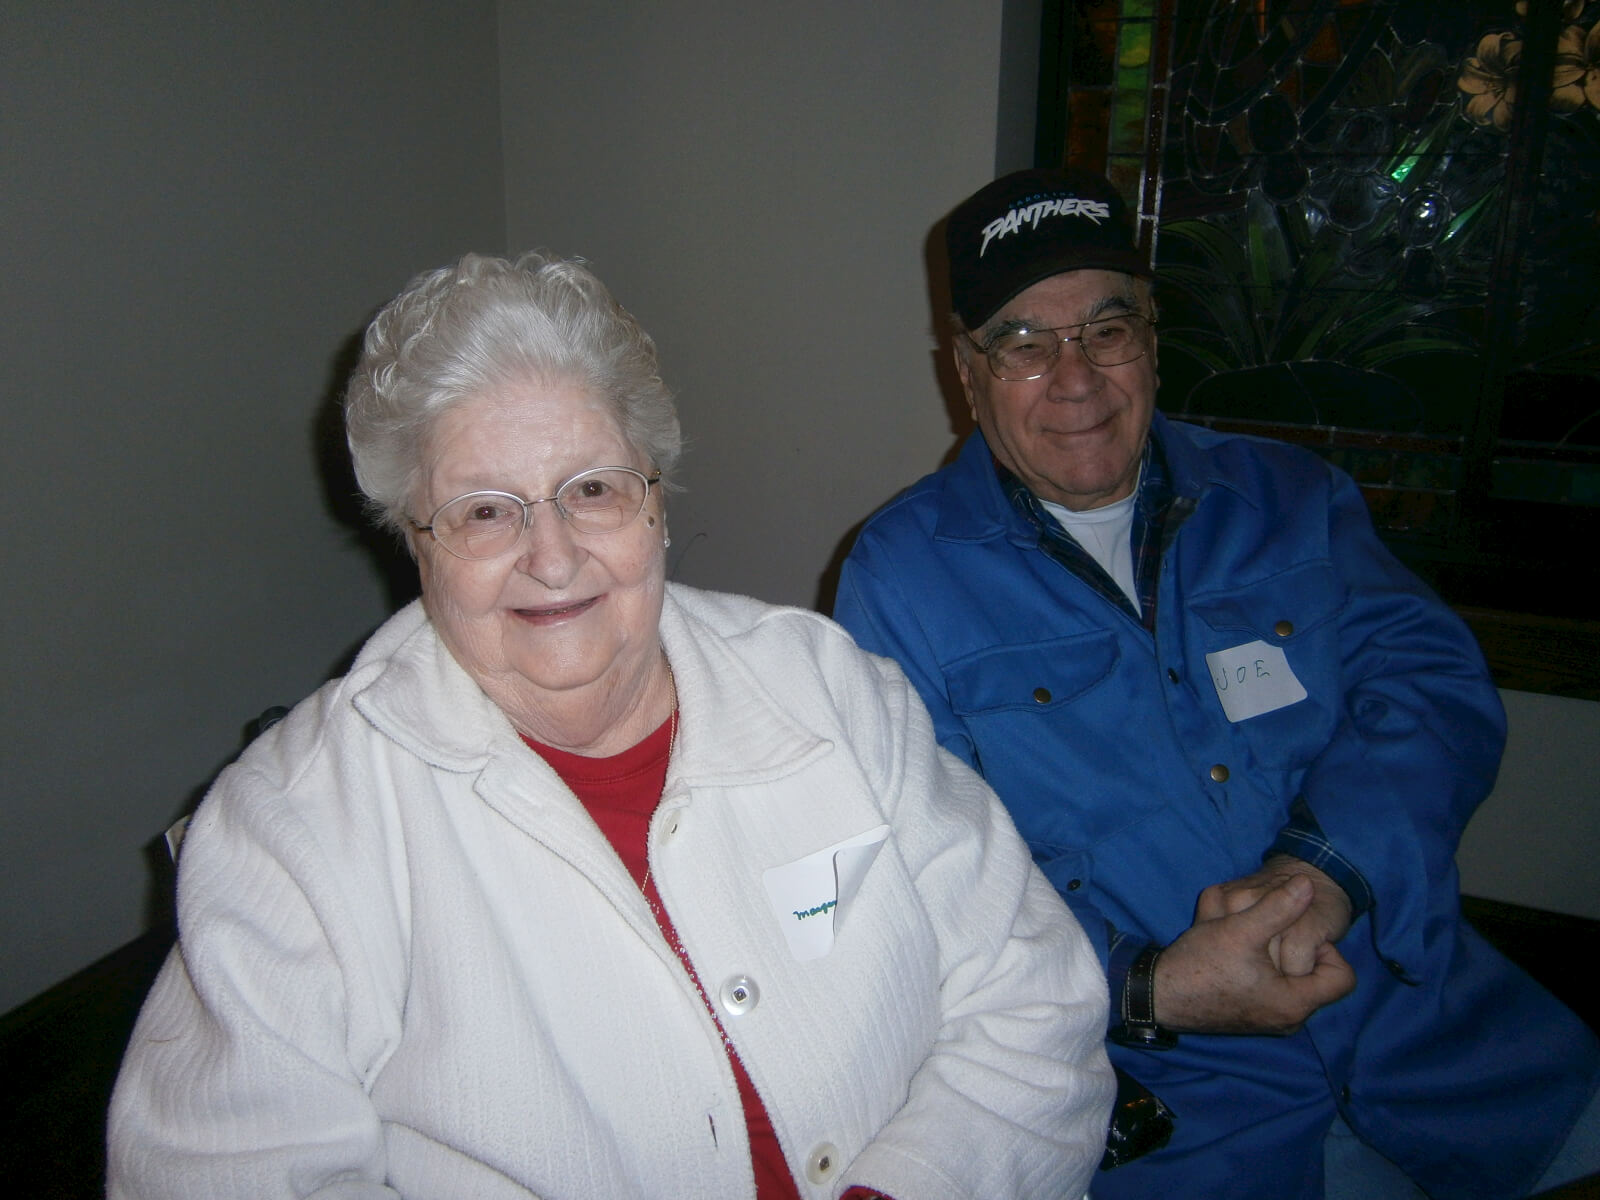 at the luncheon are Wexford House residents Margaret Ingle and Joe Campana